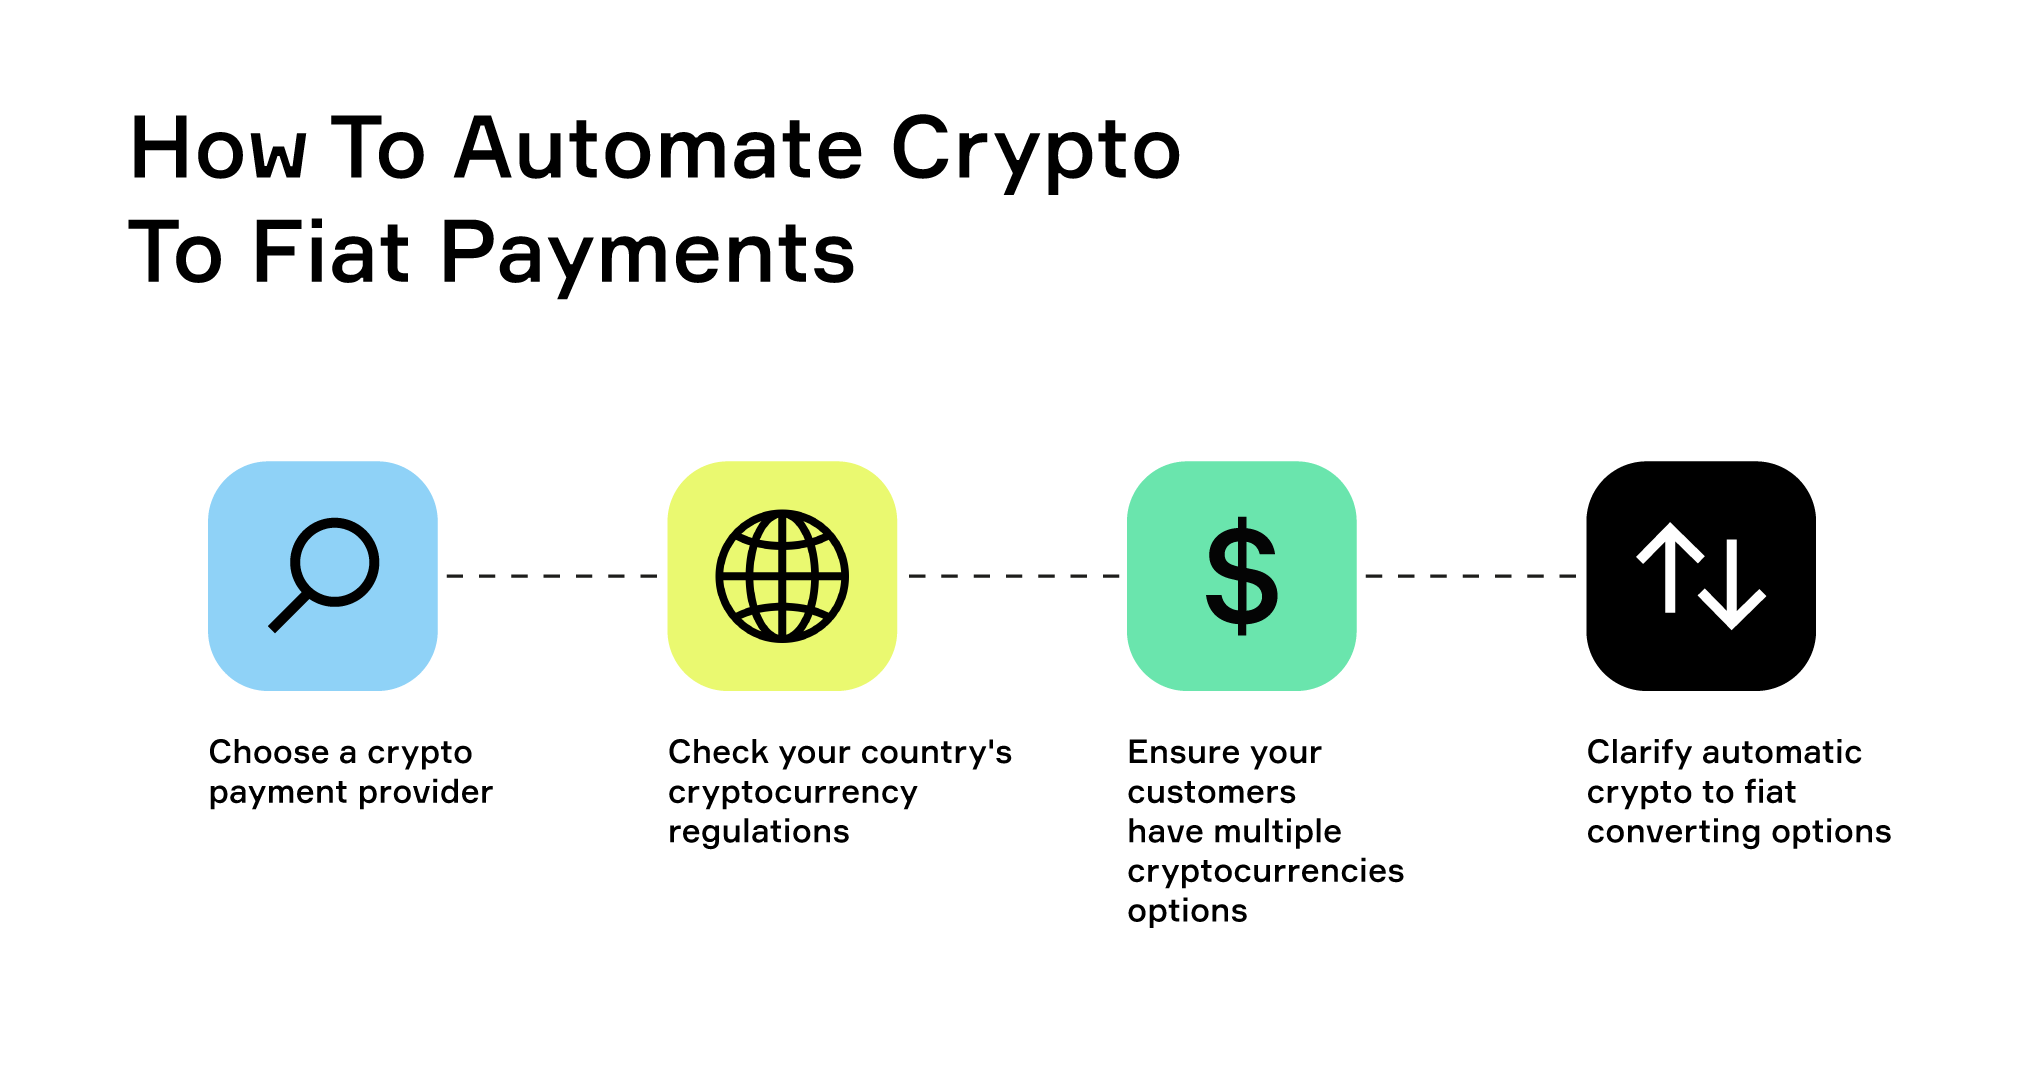 How To Automate Crypto To Fiat Payments